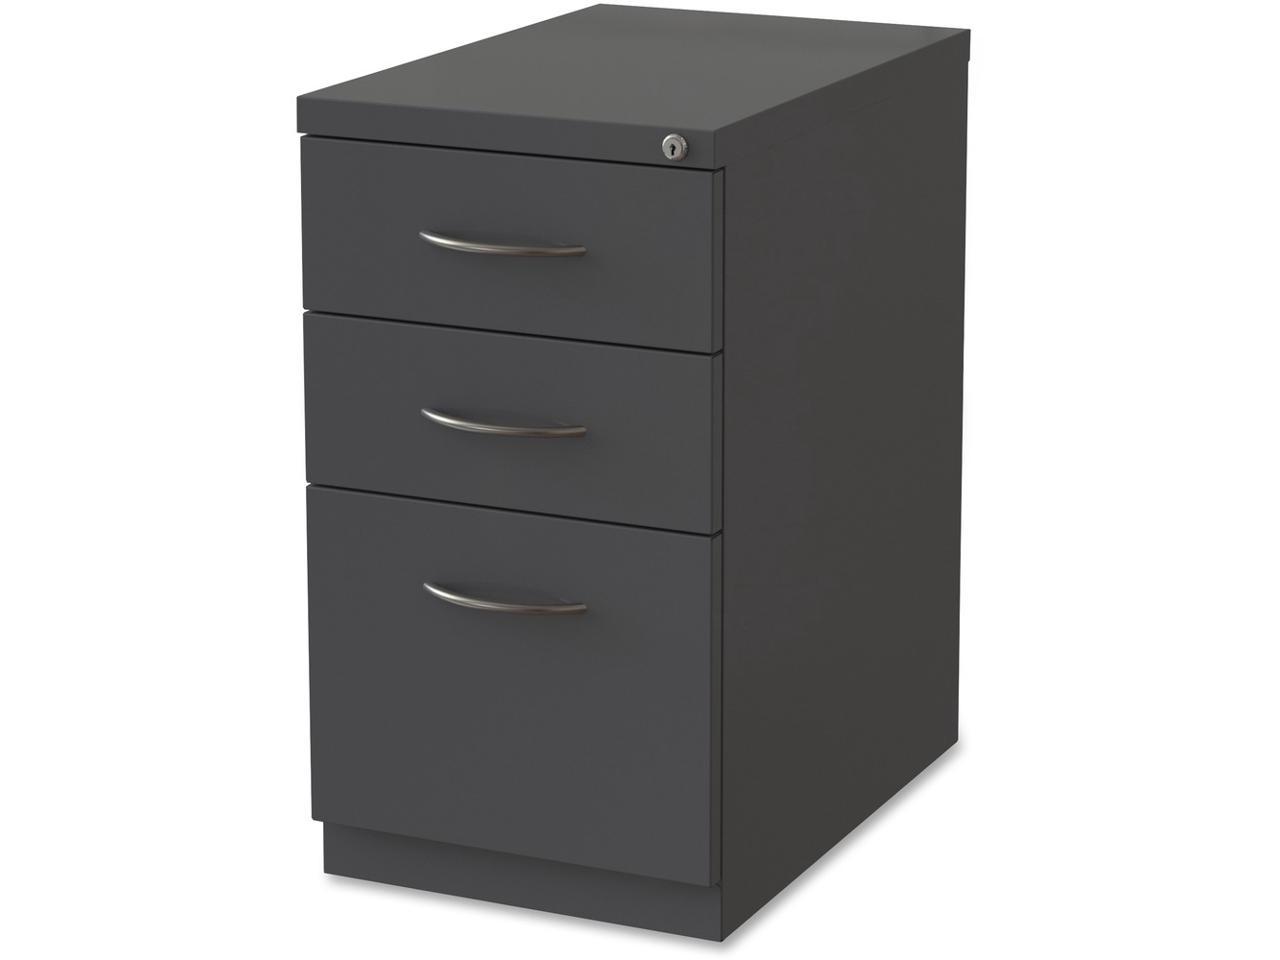 3 Drawers Vertical Steel Lockable Filing Cabinet, Gray - image 2 of 3